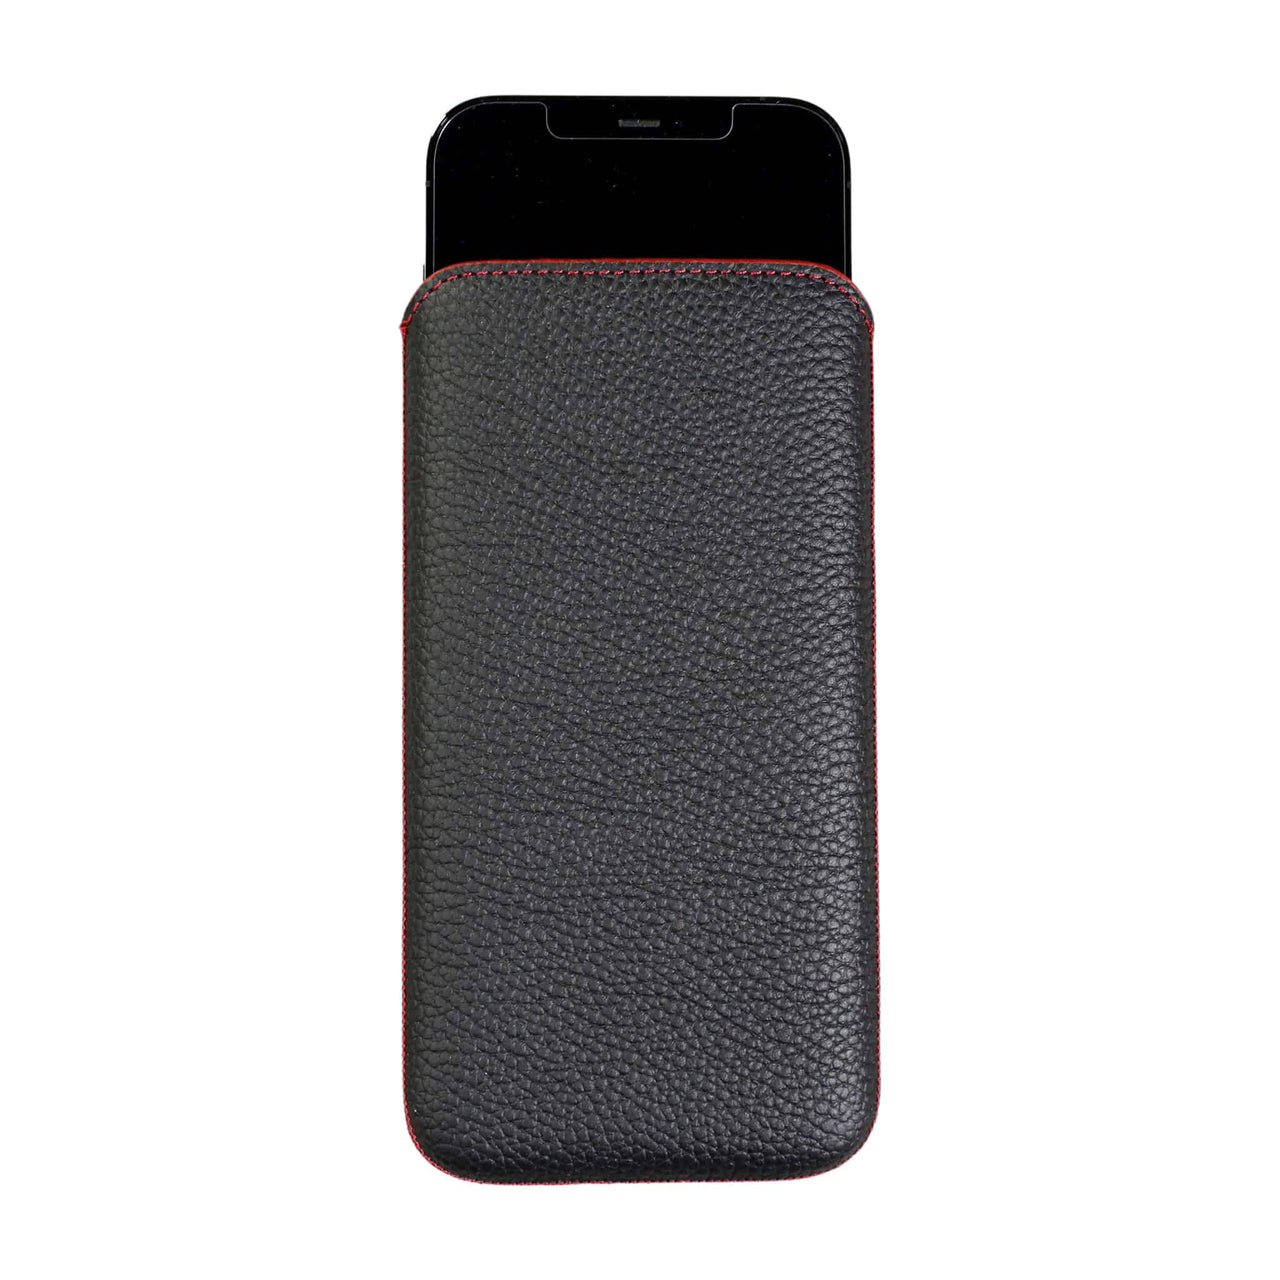 iPhone 14 Pro Max Leather Pouch Sleeve Case | Artisanpouch